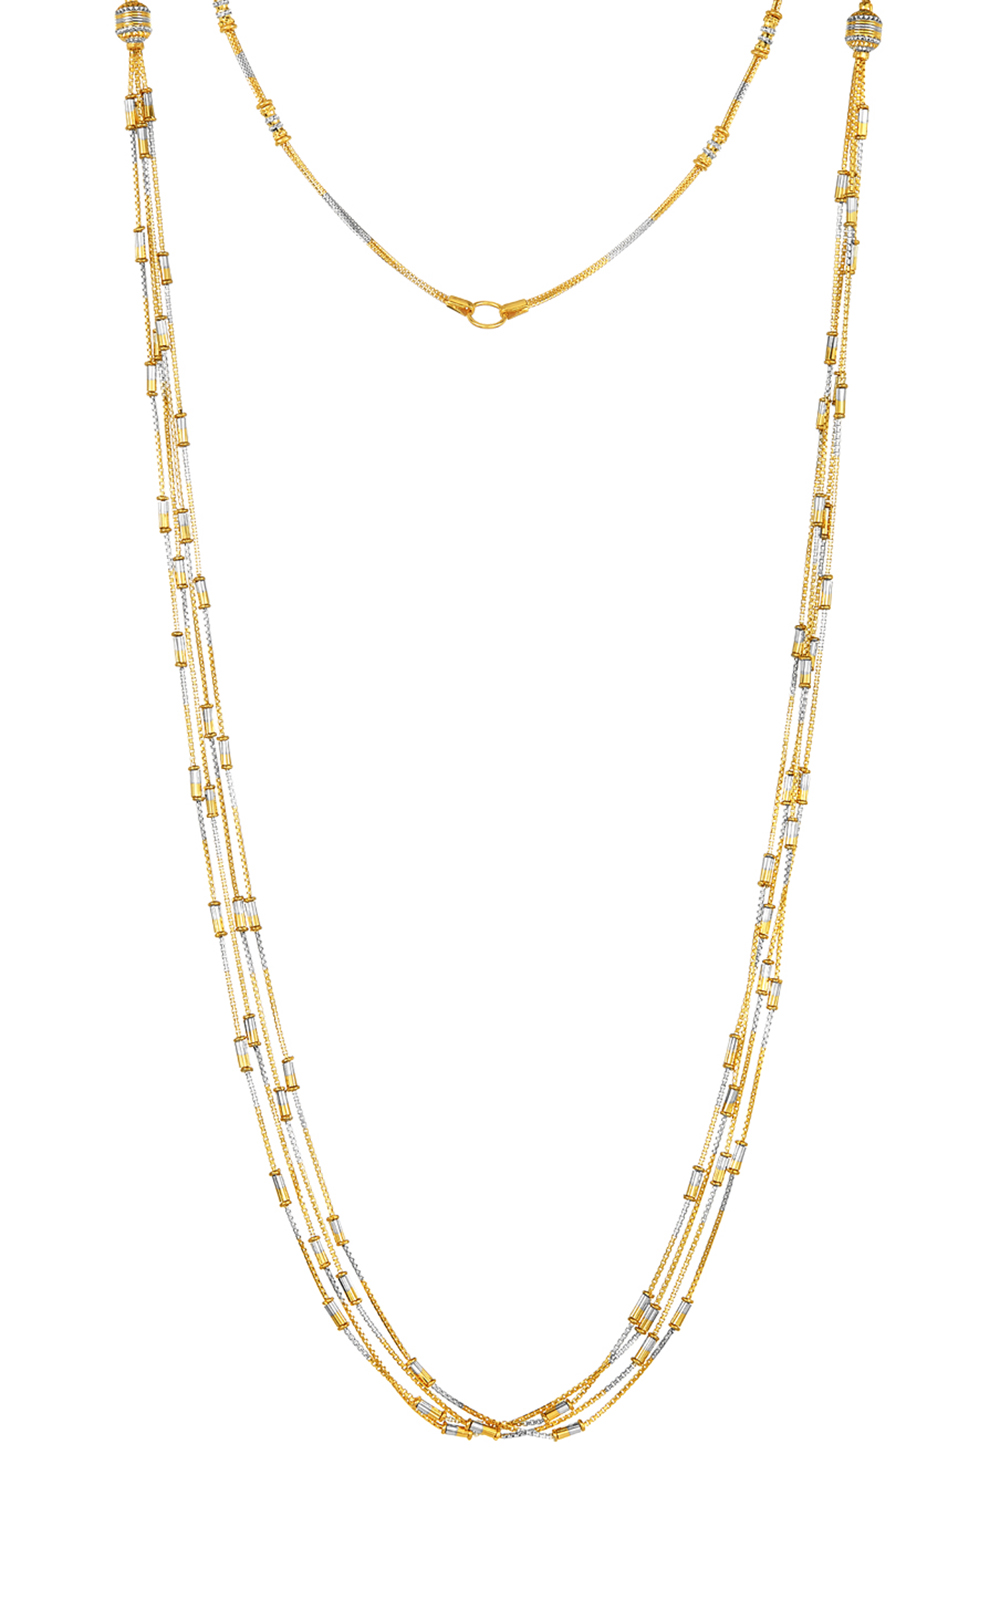 22K Two-Toned Gold Layered Fancy Handmade Chain Necklace - Long